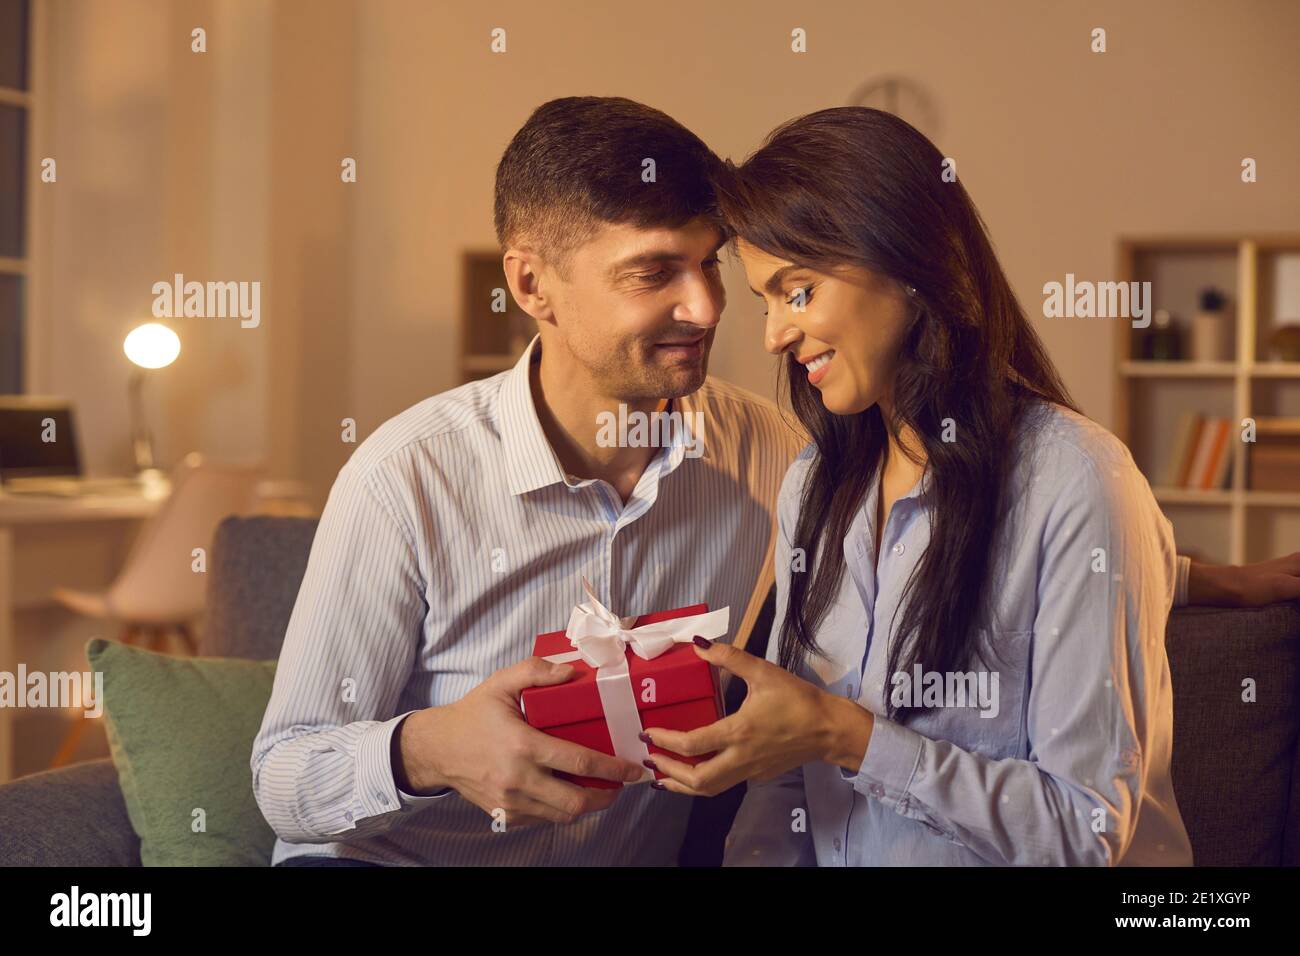 Young man in love tenderly congratulates his girlfriend on Valentine's Day by giving her a gift. Stock Photo